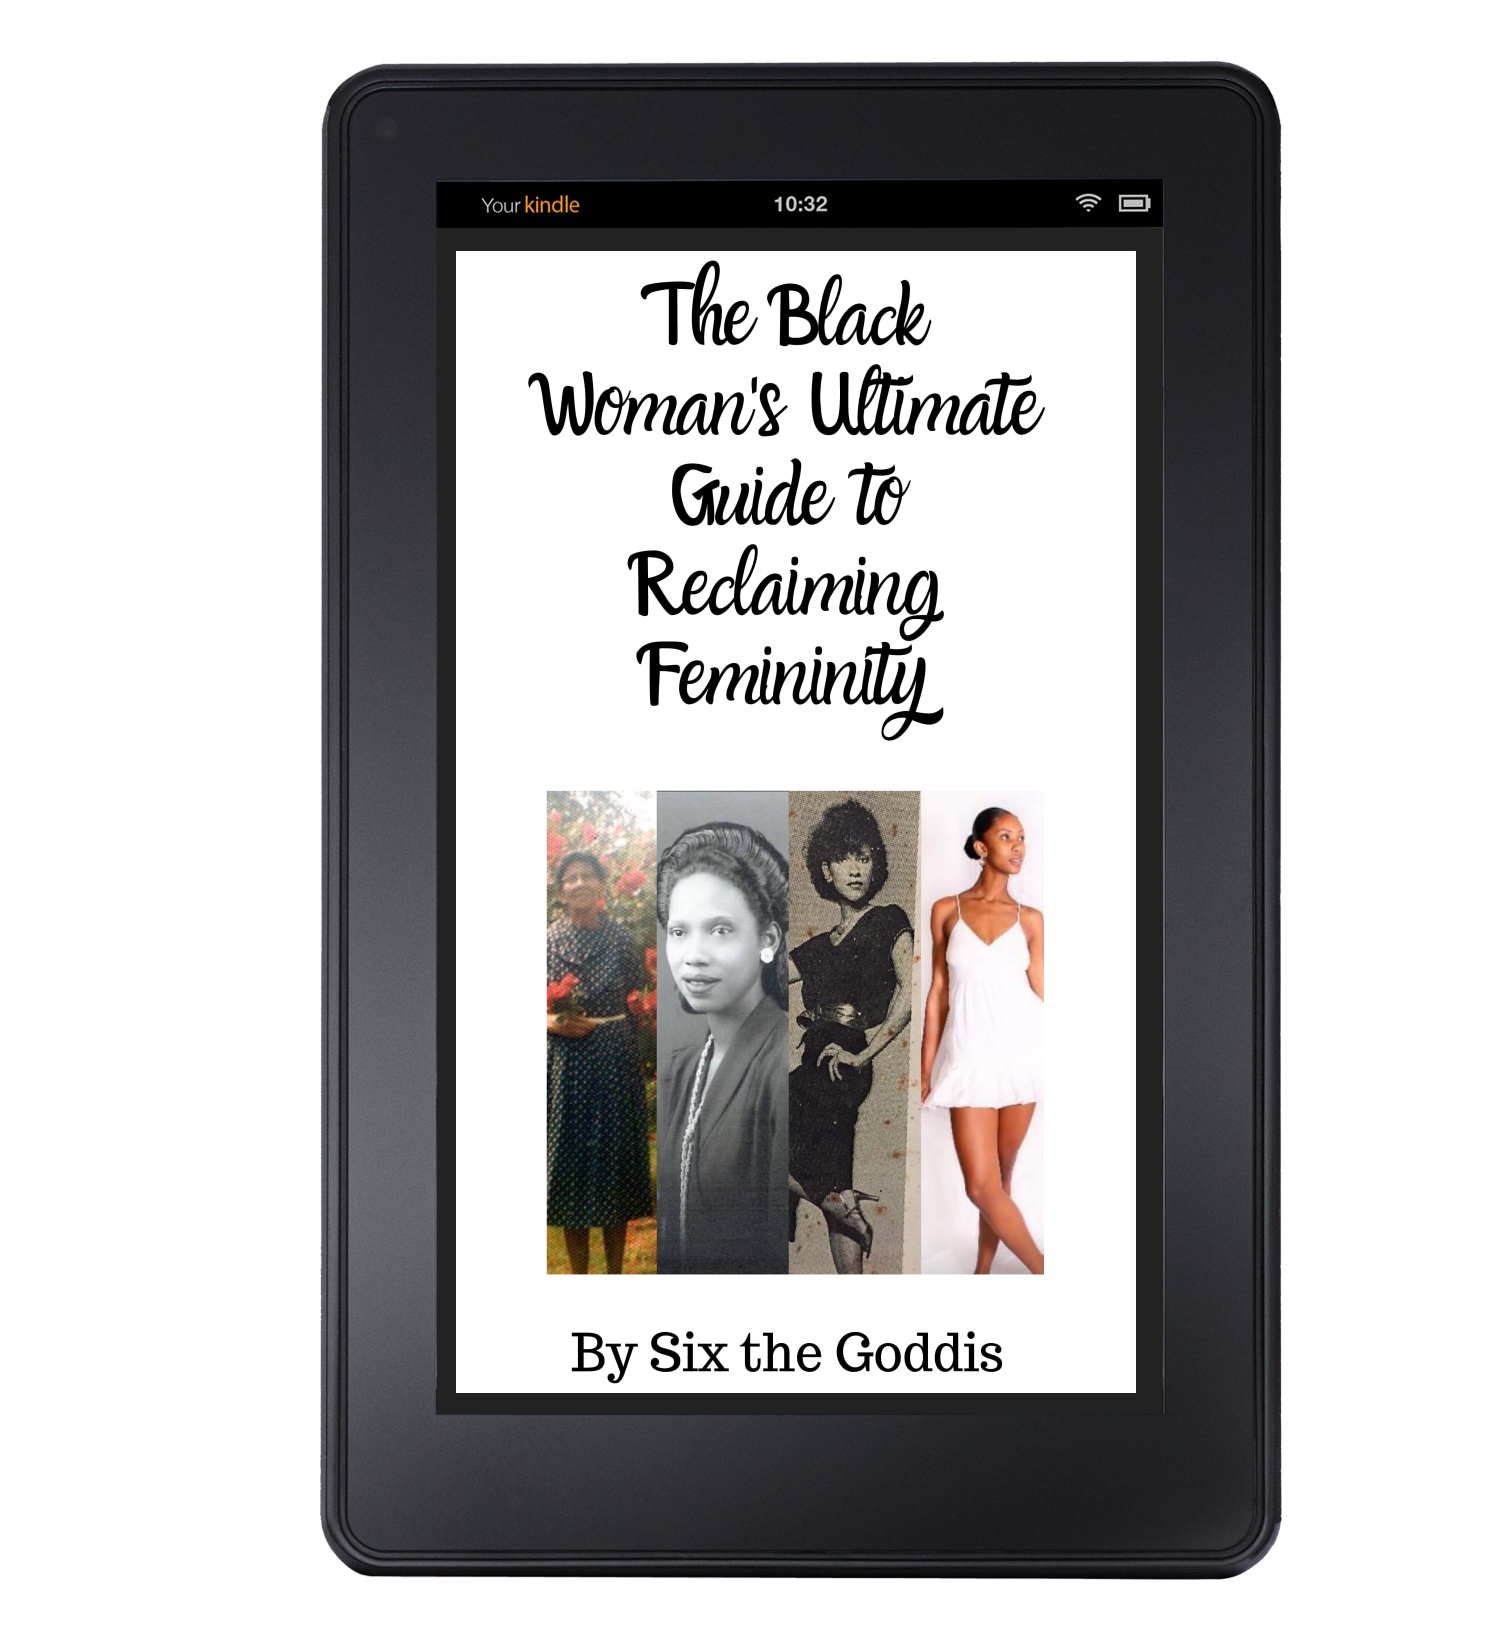 The Black Woman's Ultimate Guide to Reclaiming Femininity EBOOK DIGITAL DOWNLOAD